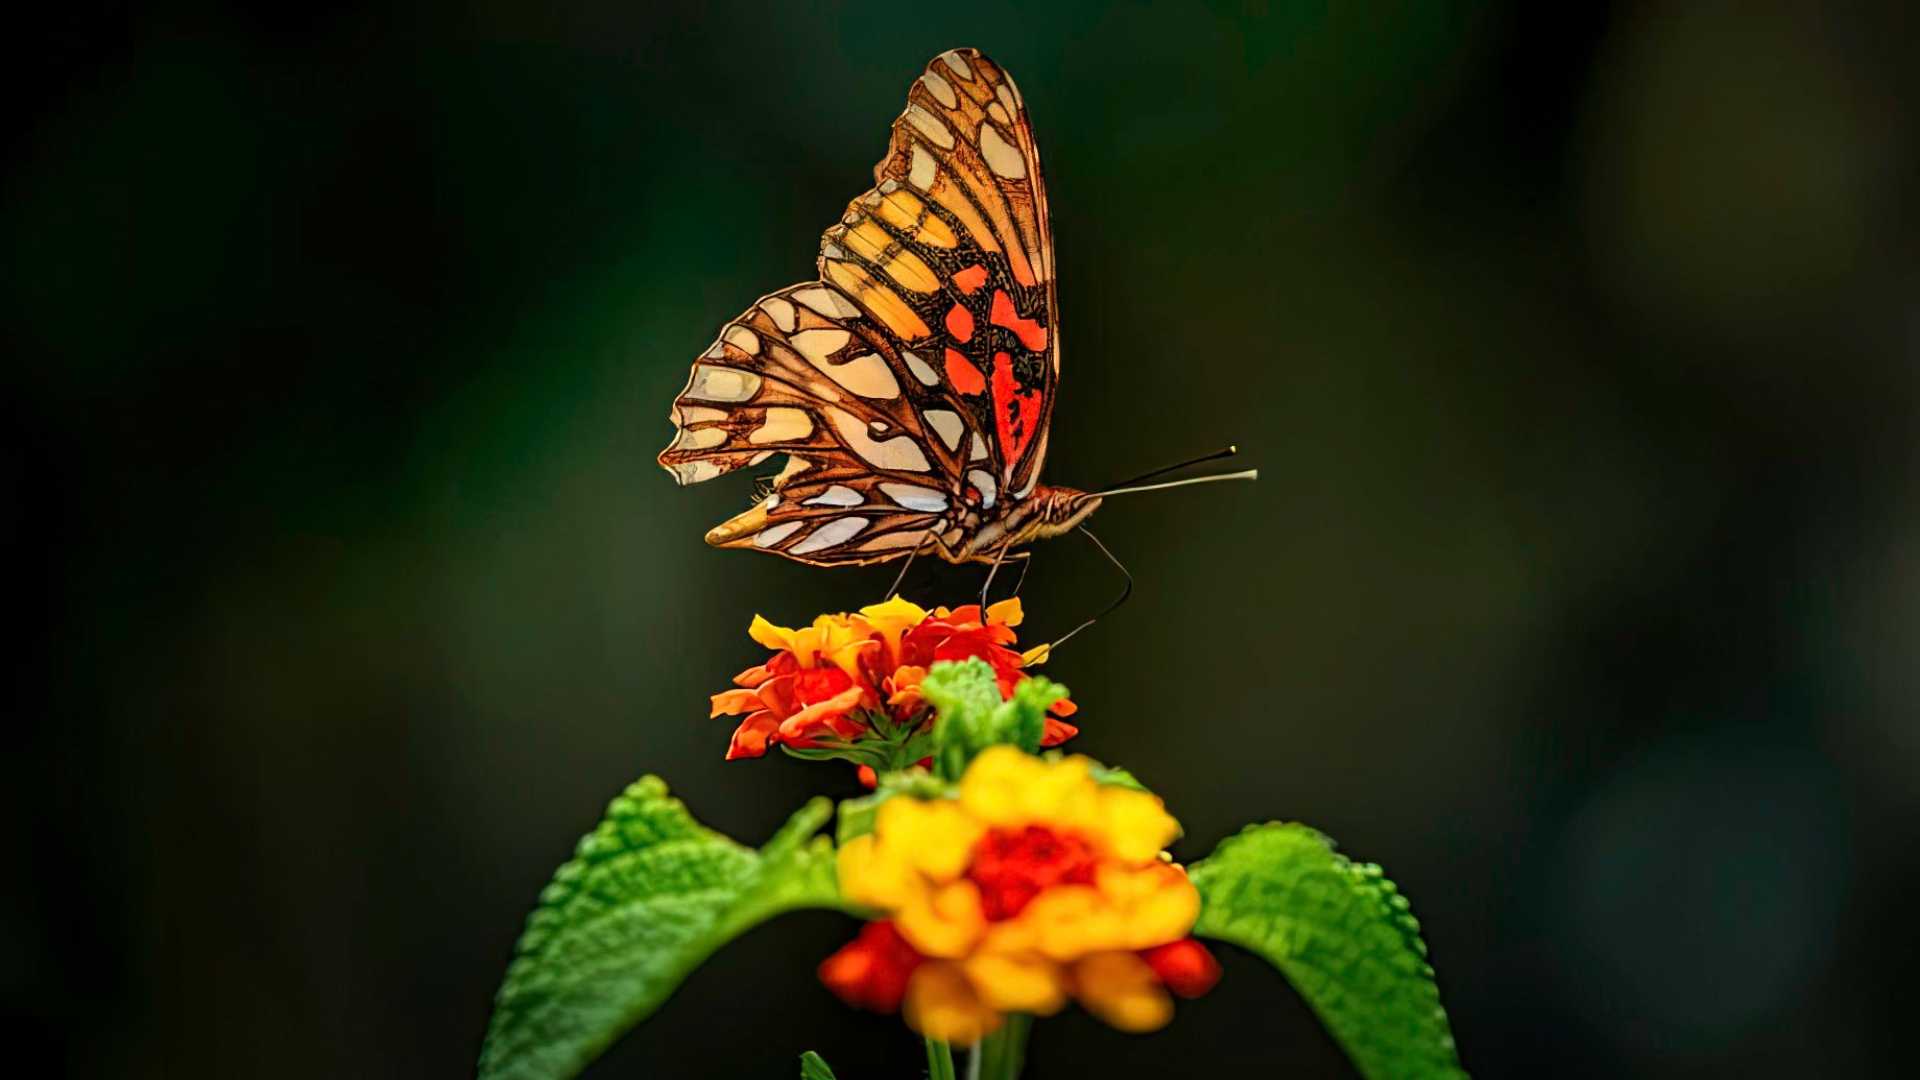 Vibrant Mexican silverspot butterfly perched gracefully at El Pilar Reserve, captured during our immersive forest bath experience.